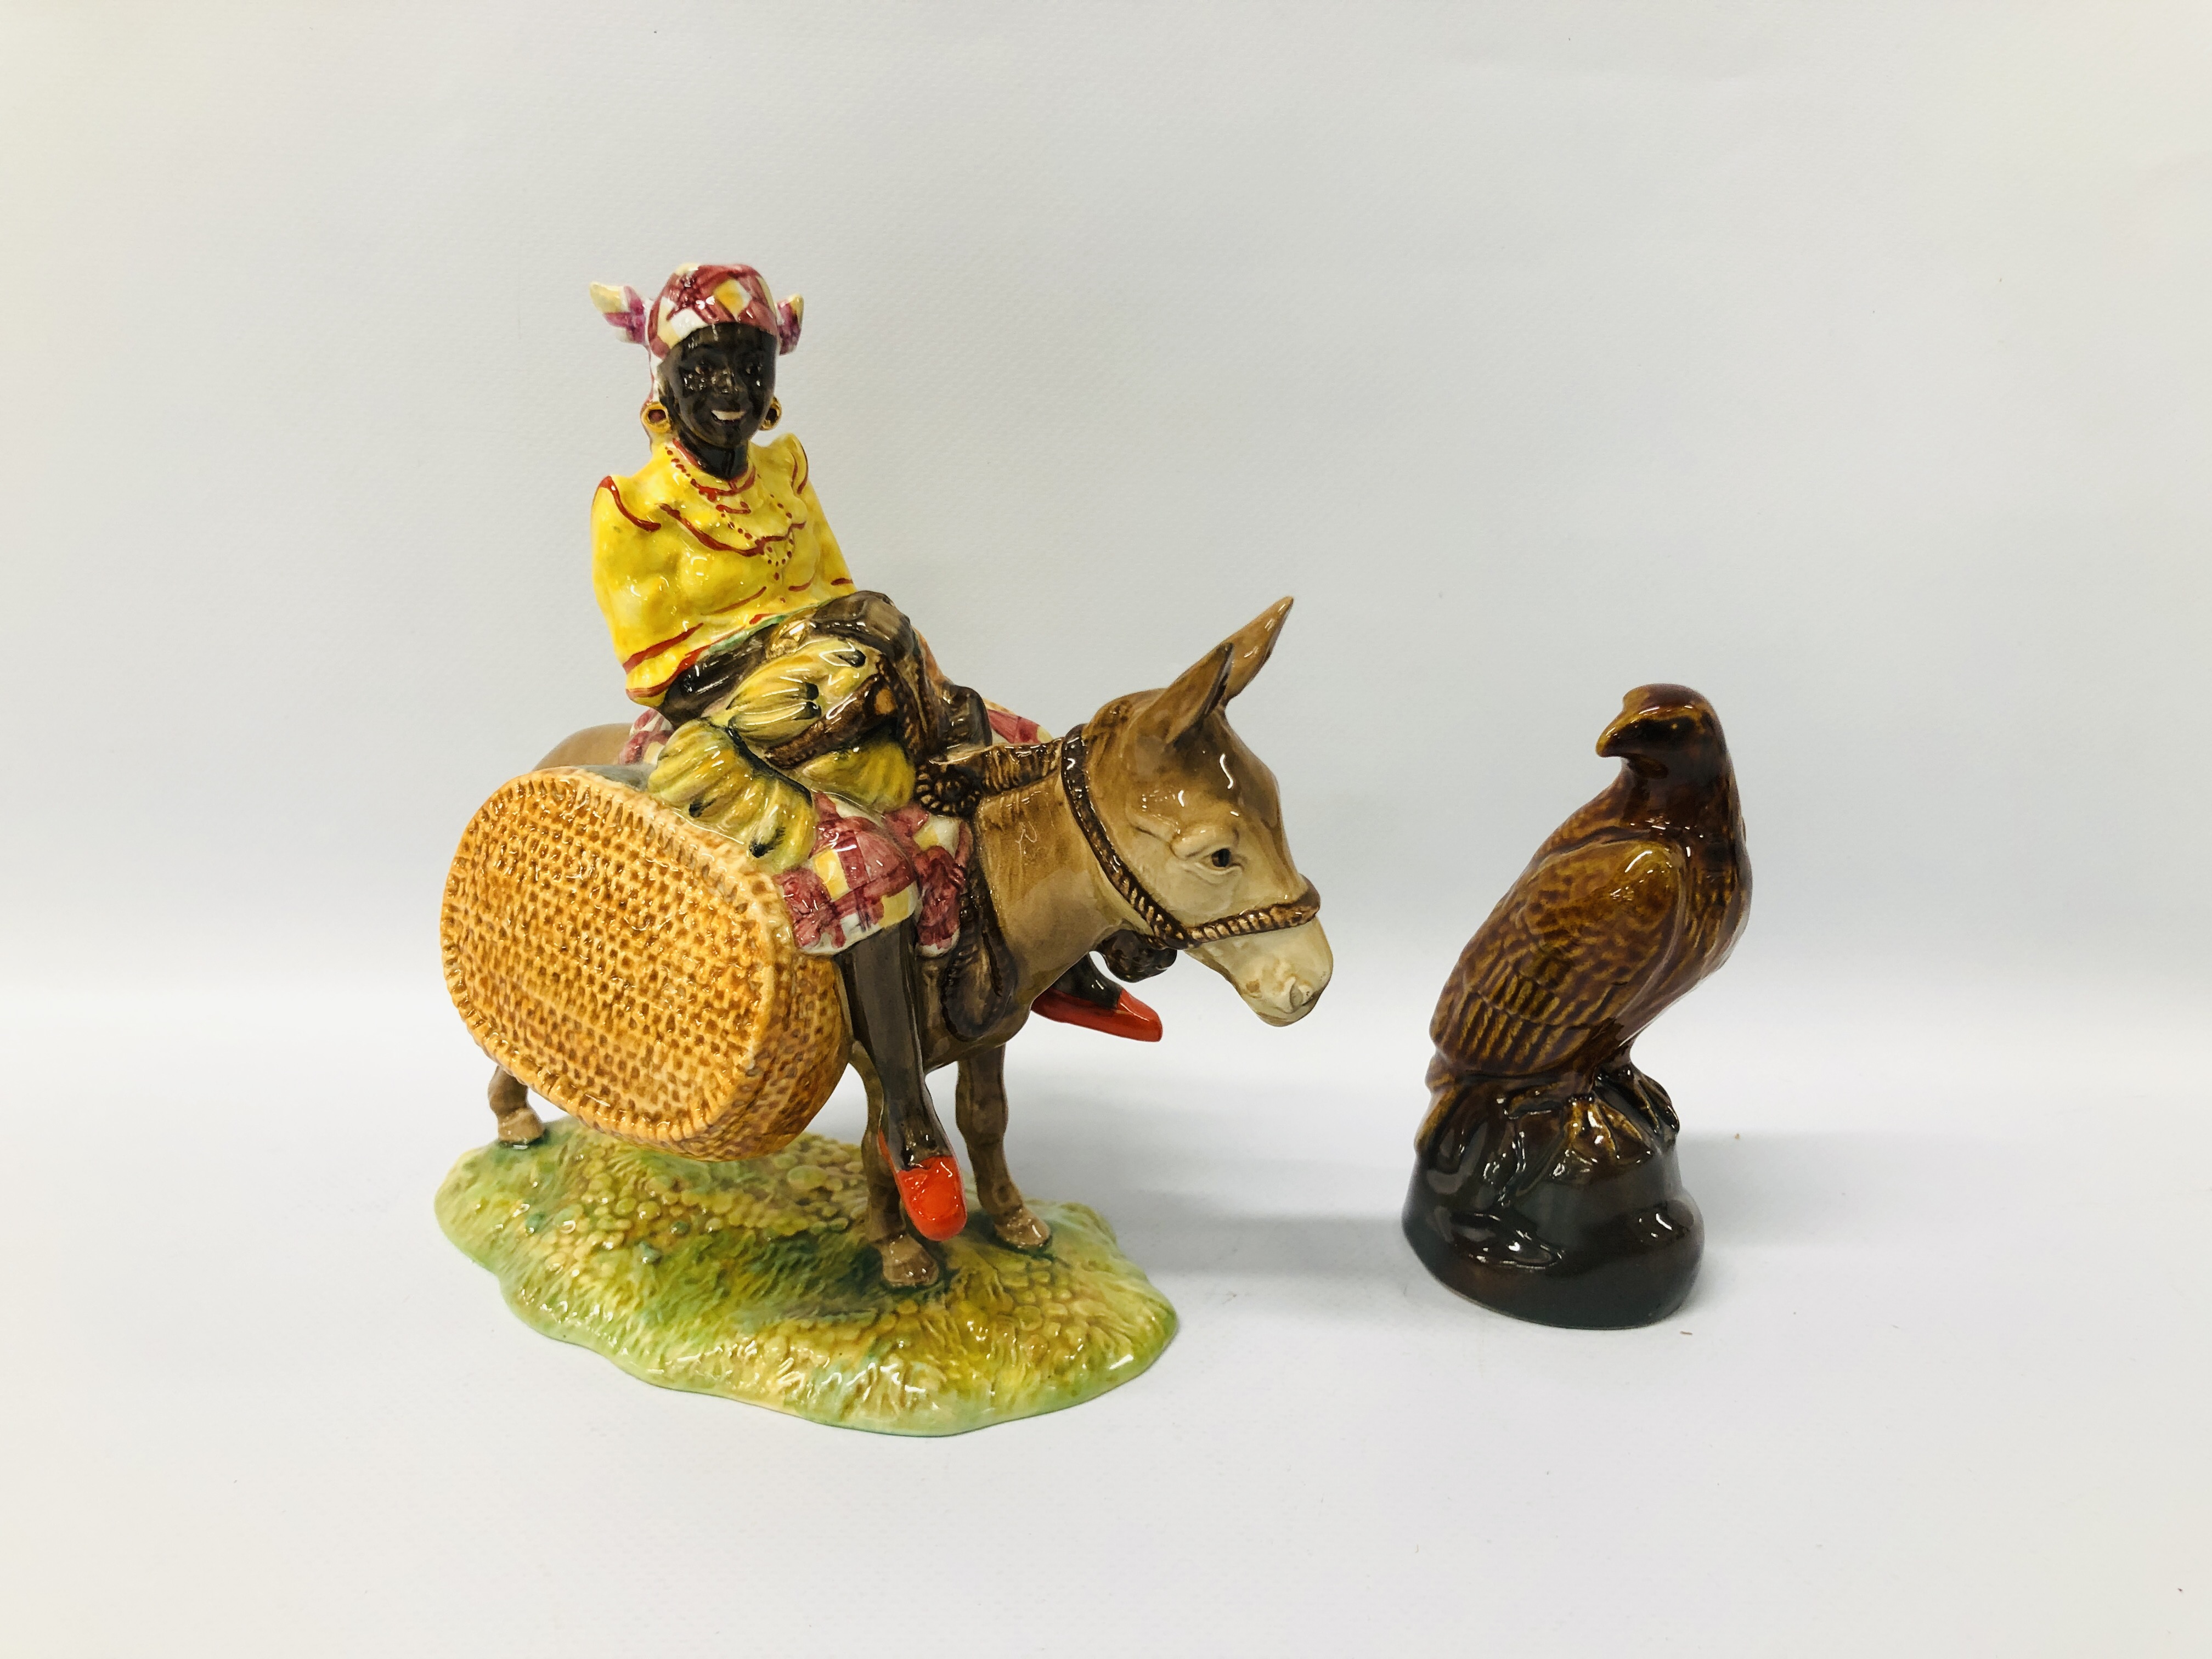 BESWICK "SUSIE JAMAICA" FIGURE ALONG WITH A MINIATURE BESWICK BENEAGLES WHISKY DECANTER (EMPTY)